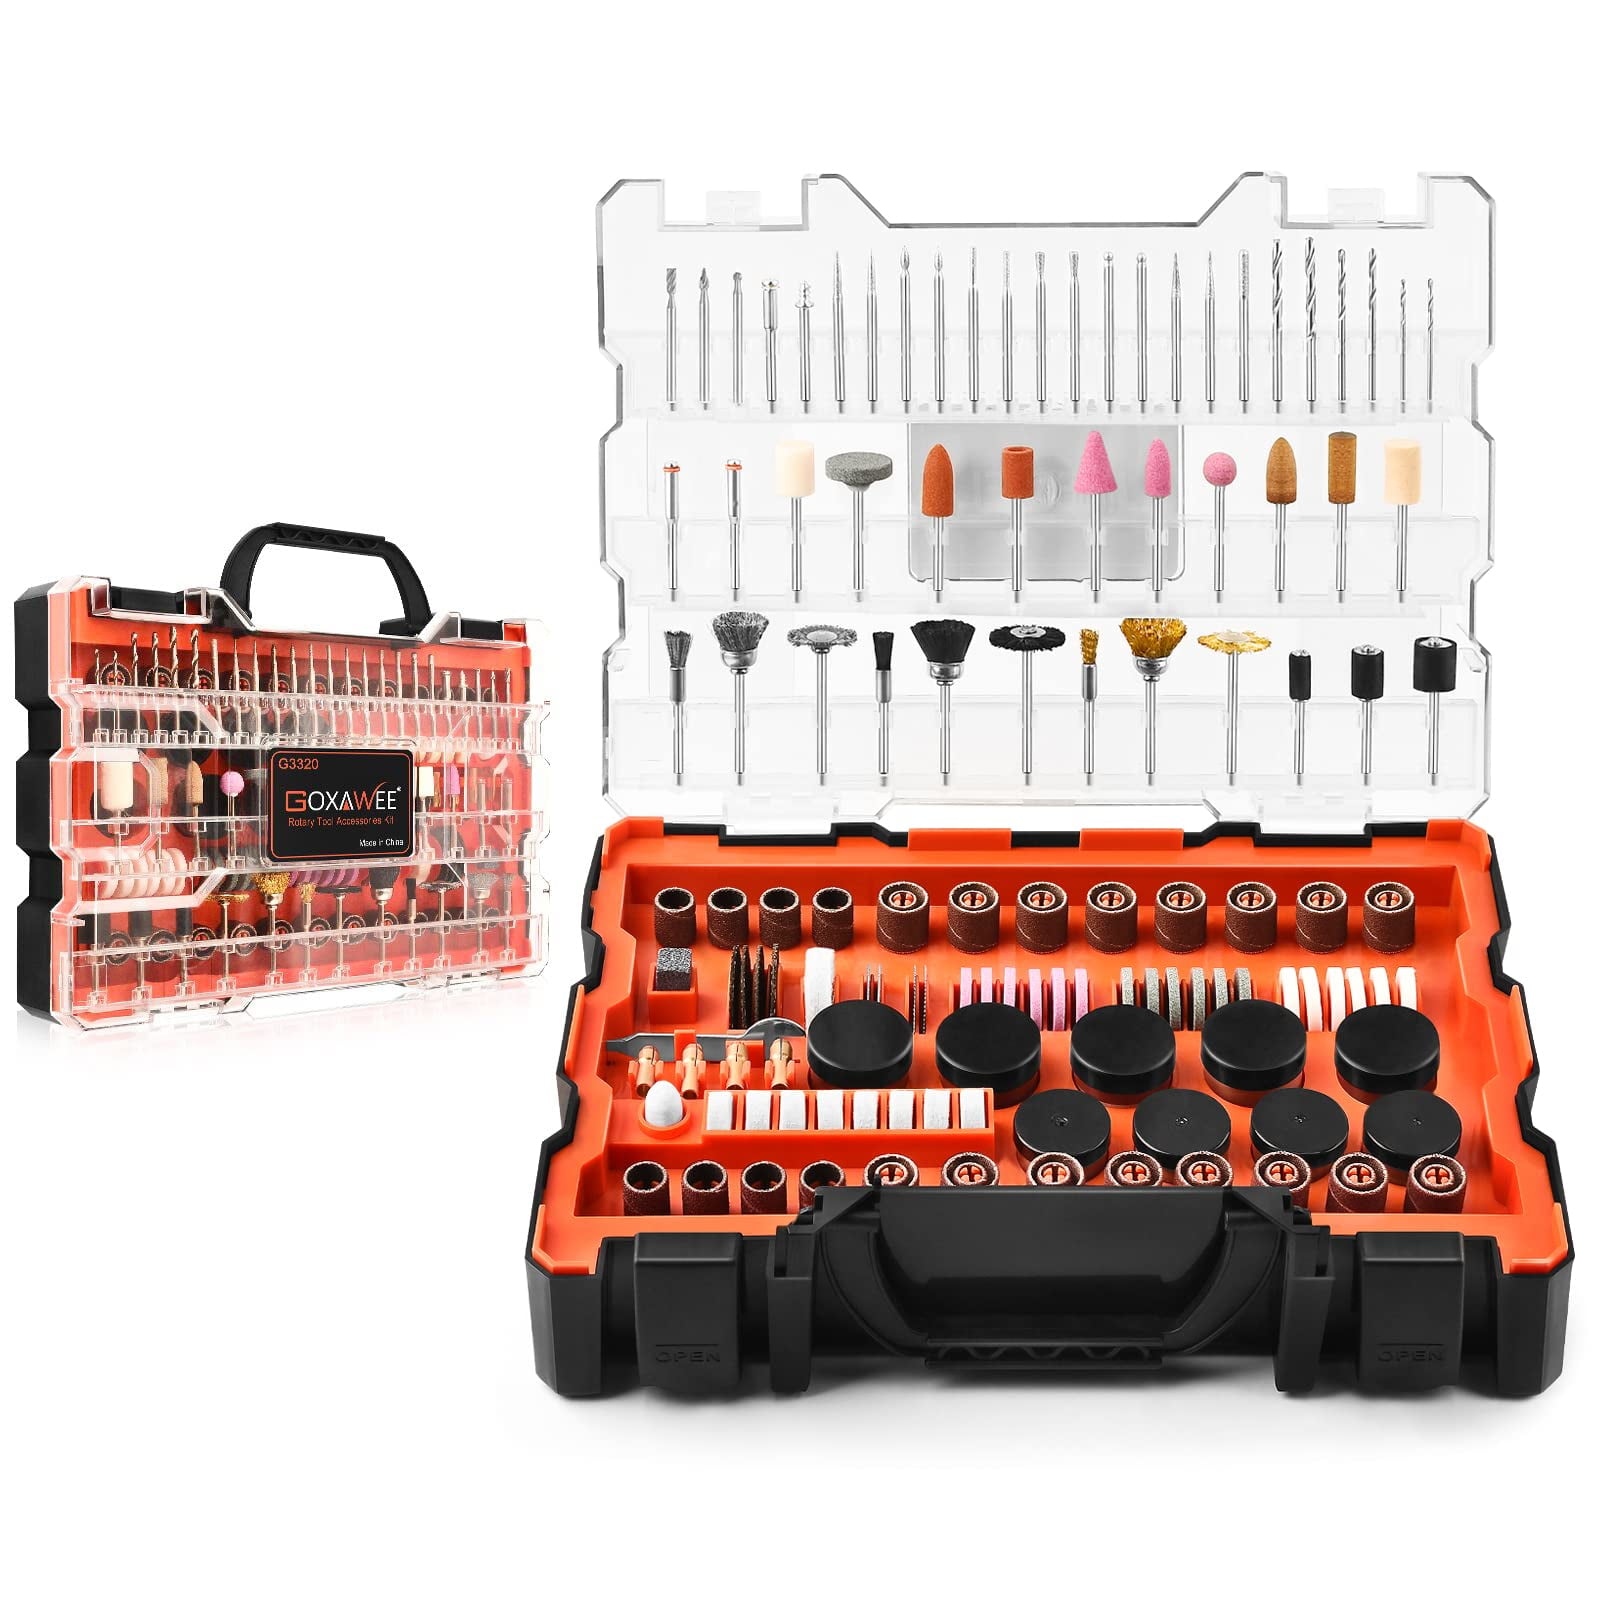 0.5-6 mm Advanced Flex Shaft & 82Pcs Multifunctional Accessories for DIY Projects 6 Step Variable Speed GOXAWEE Rotary Tool Kit 240W Power Die Grinder Set with 1/4 Inch 3-Jaw Chuck 